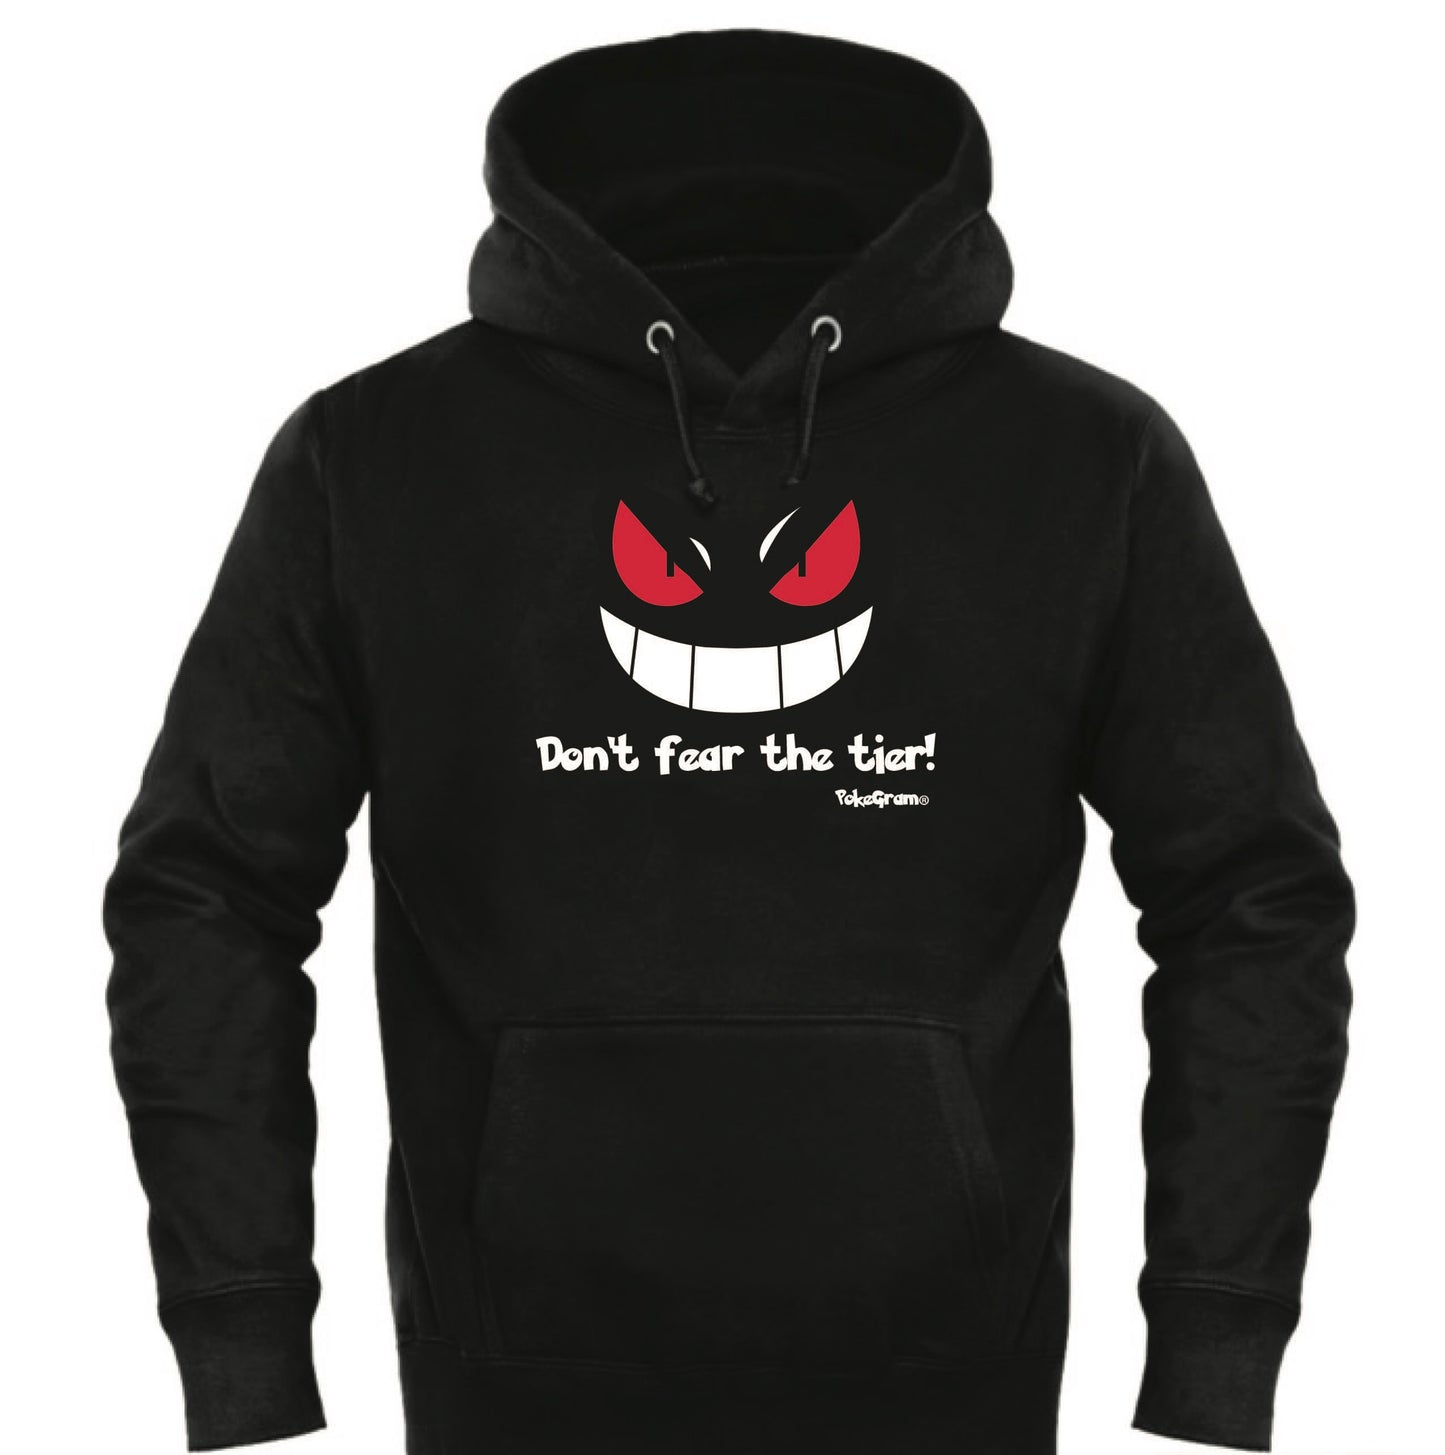 “Don’t Fear The Tier!” Hoodie - Black